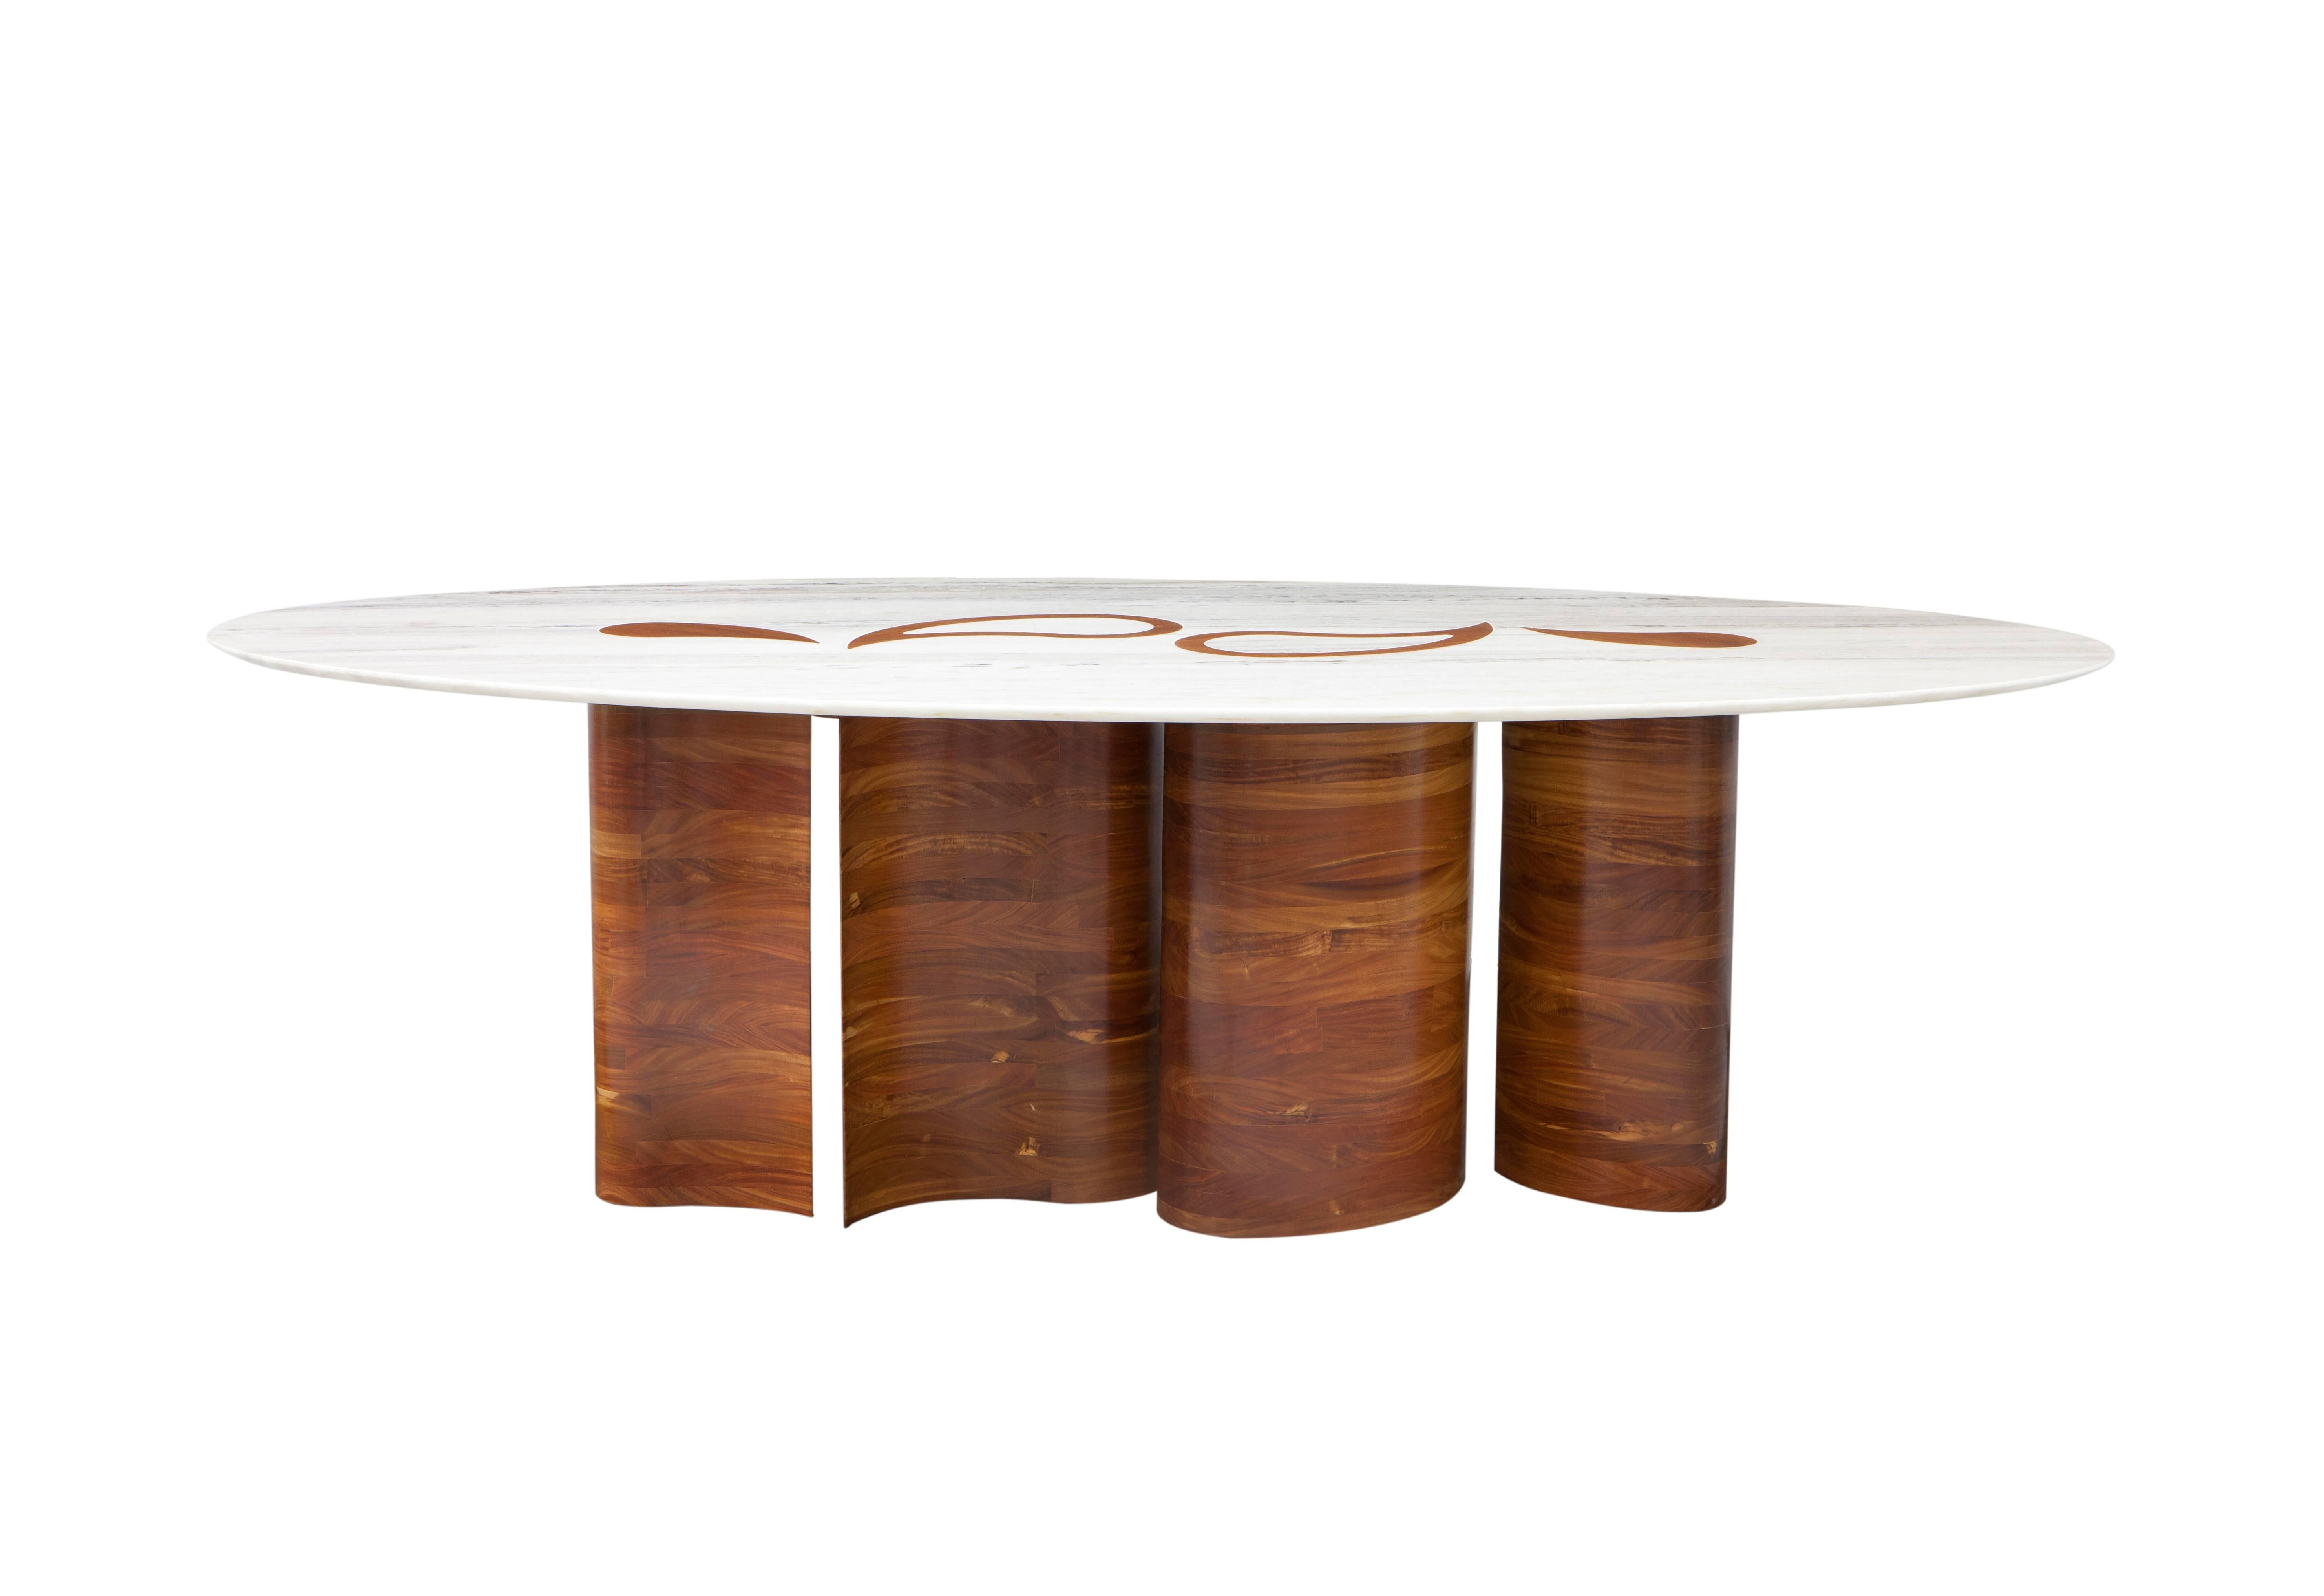 The brazilian solid cabreúva wood bases surpasses the champagne marble top and stands out on the surface of the table, creating an unexpected and sophisticated design and allowing the table to be used either alone, as a highlight in an entrance